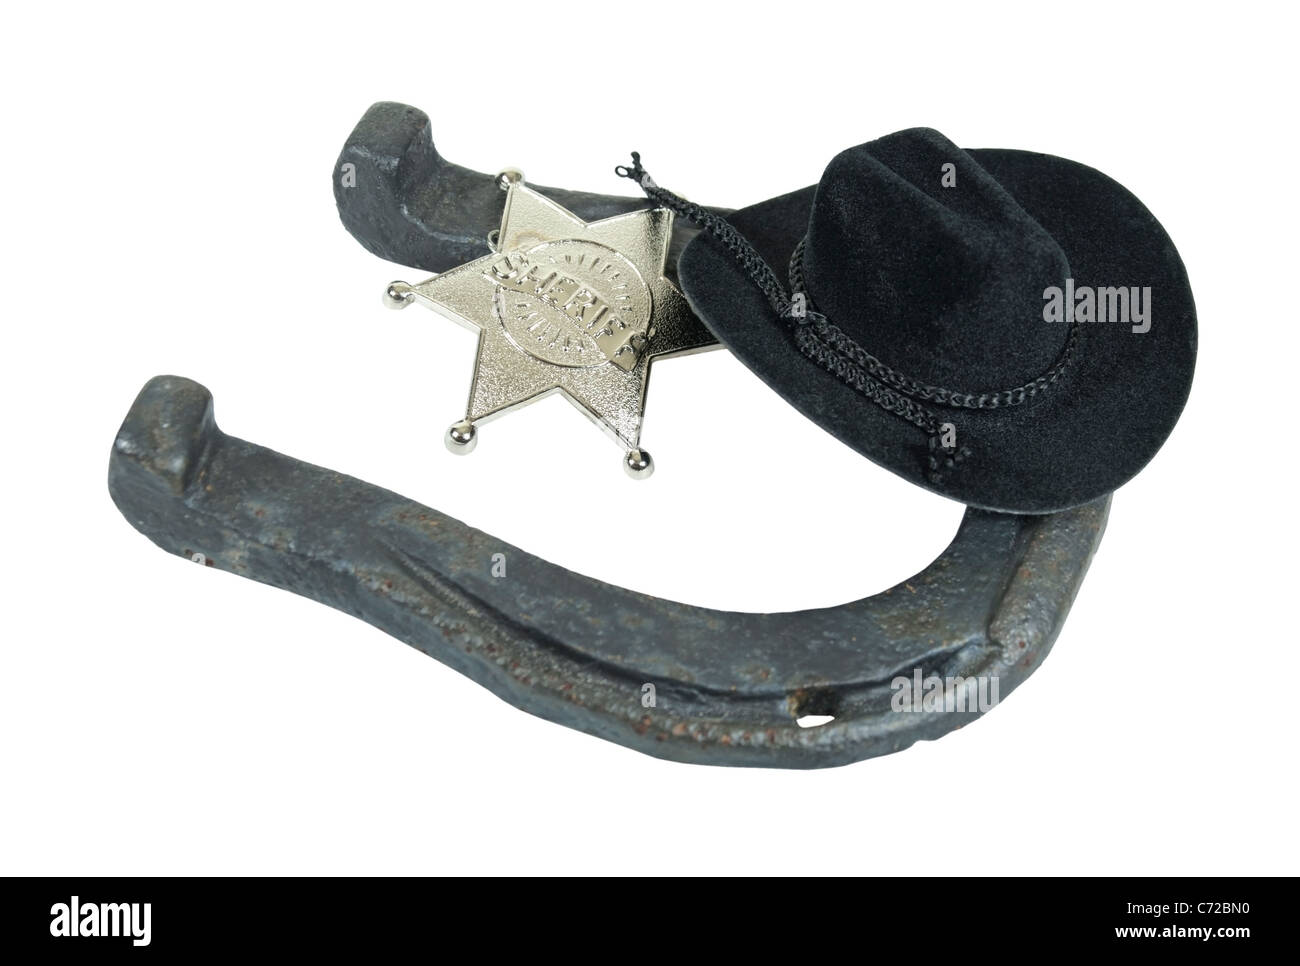 Old worn horseshoe that is usually worn on the hoof of a horse - path included Stock Photo